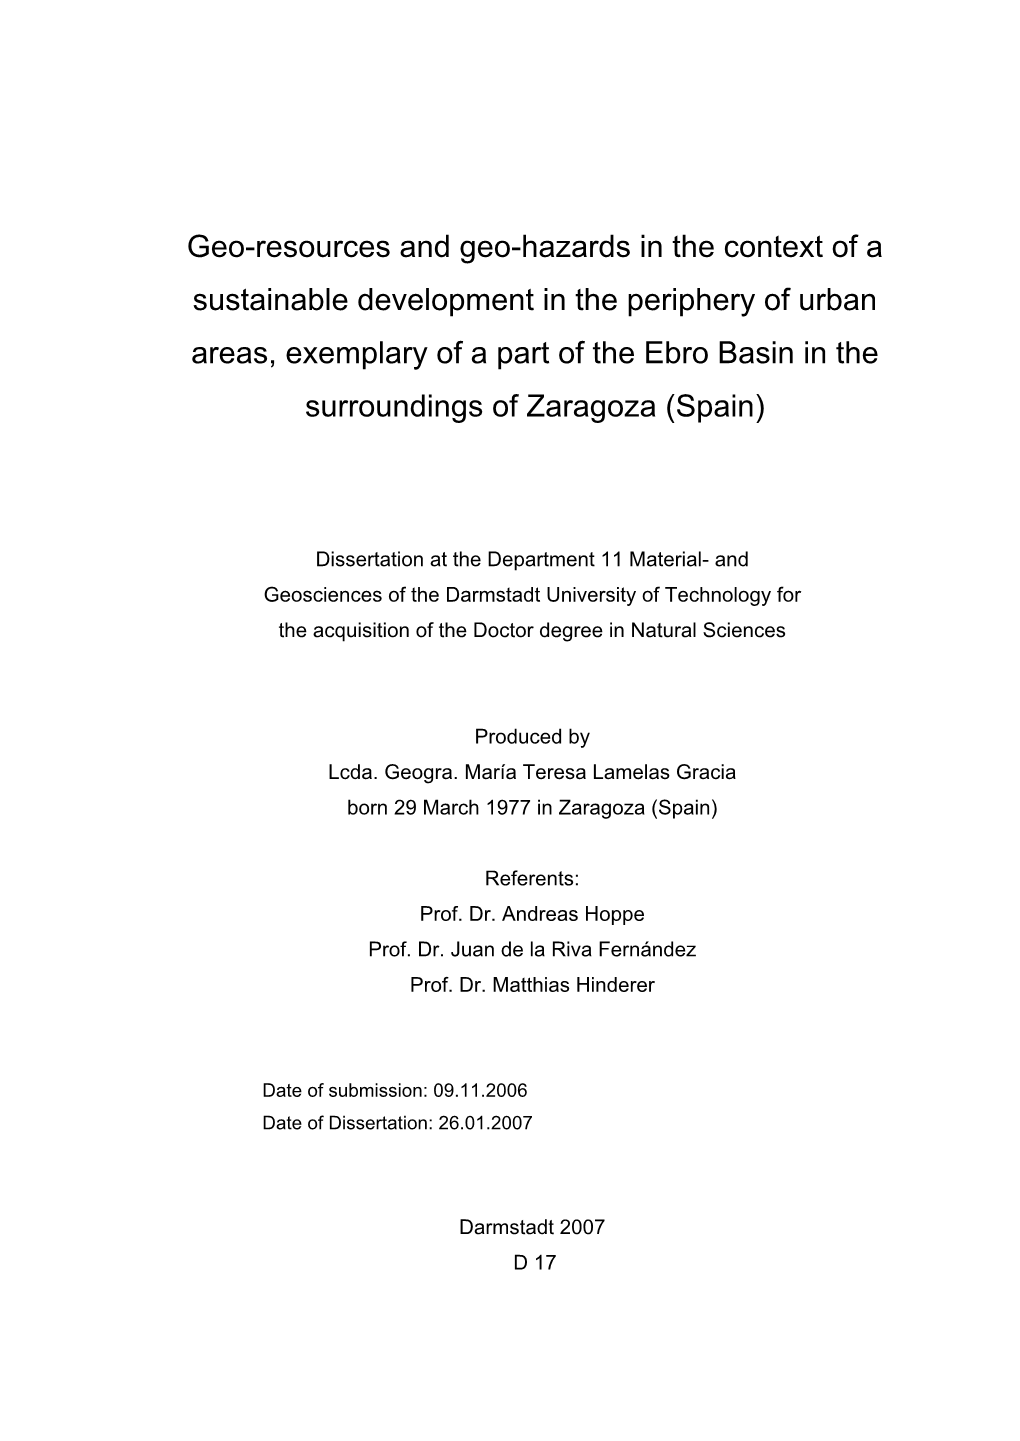 Geo-Resources and Geo-Hazards in the Context of a Sustainable